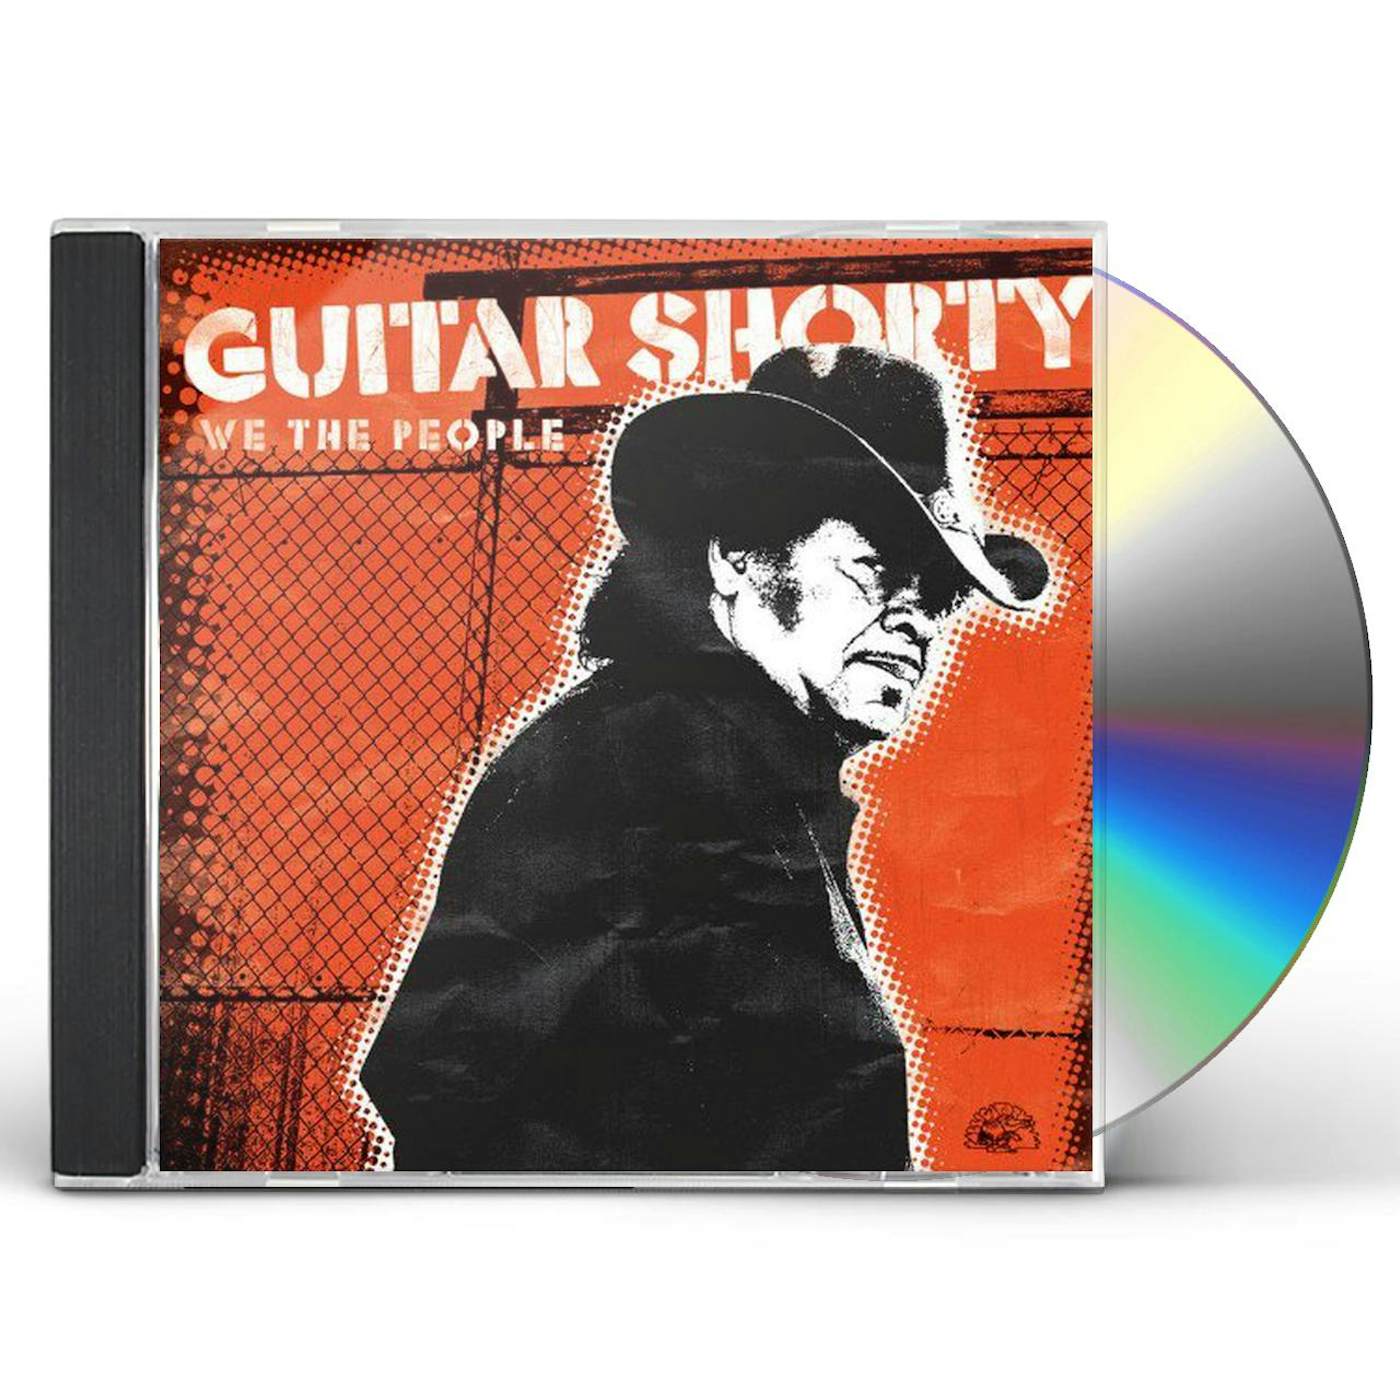 Guitar Shorty WE THE PEOPLE CD